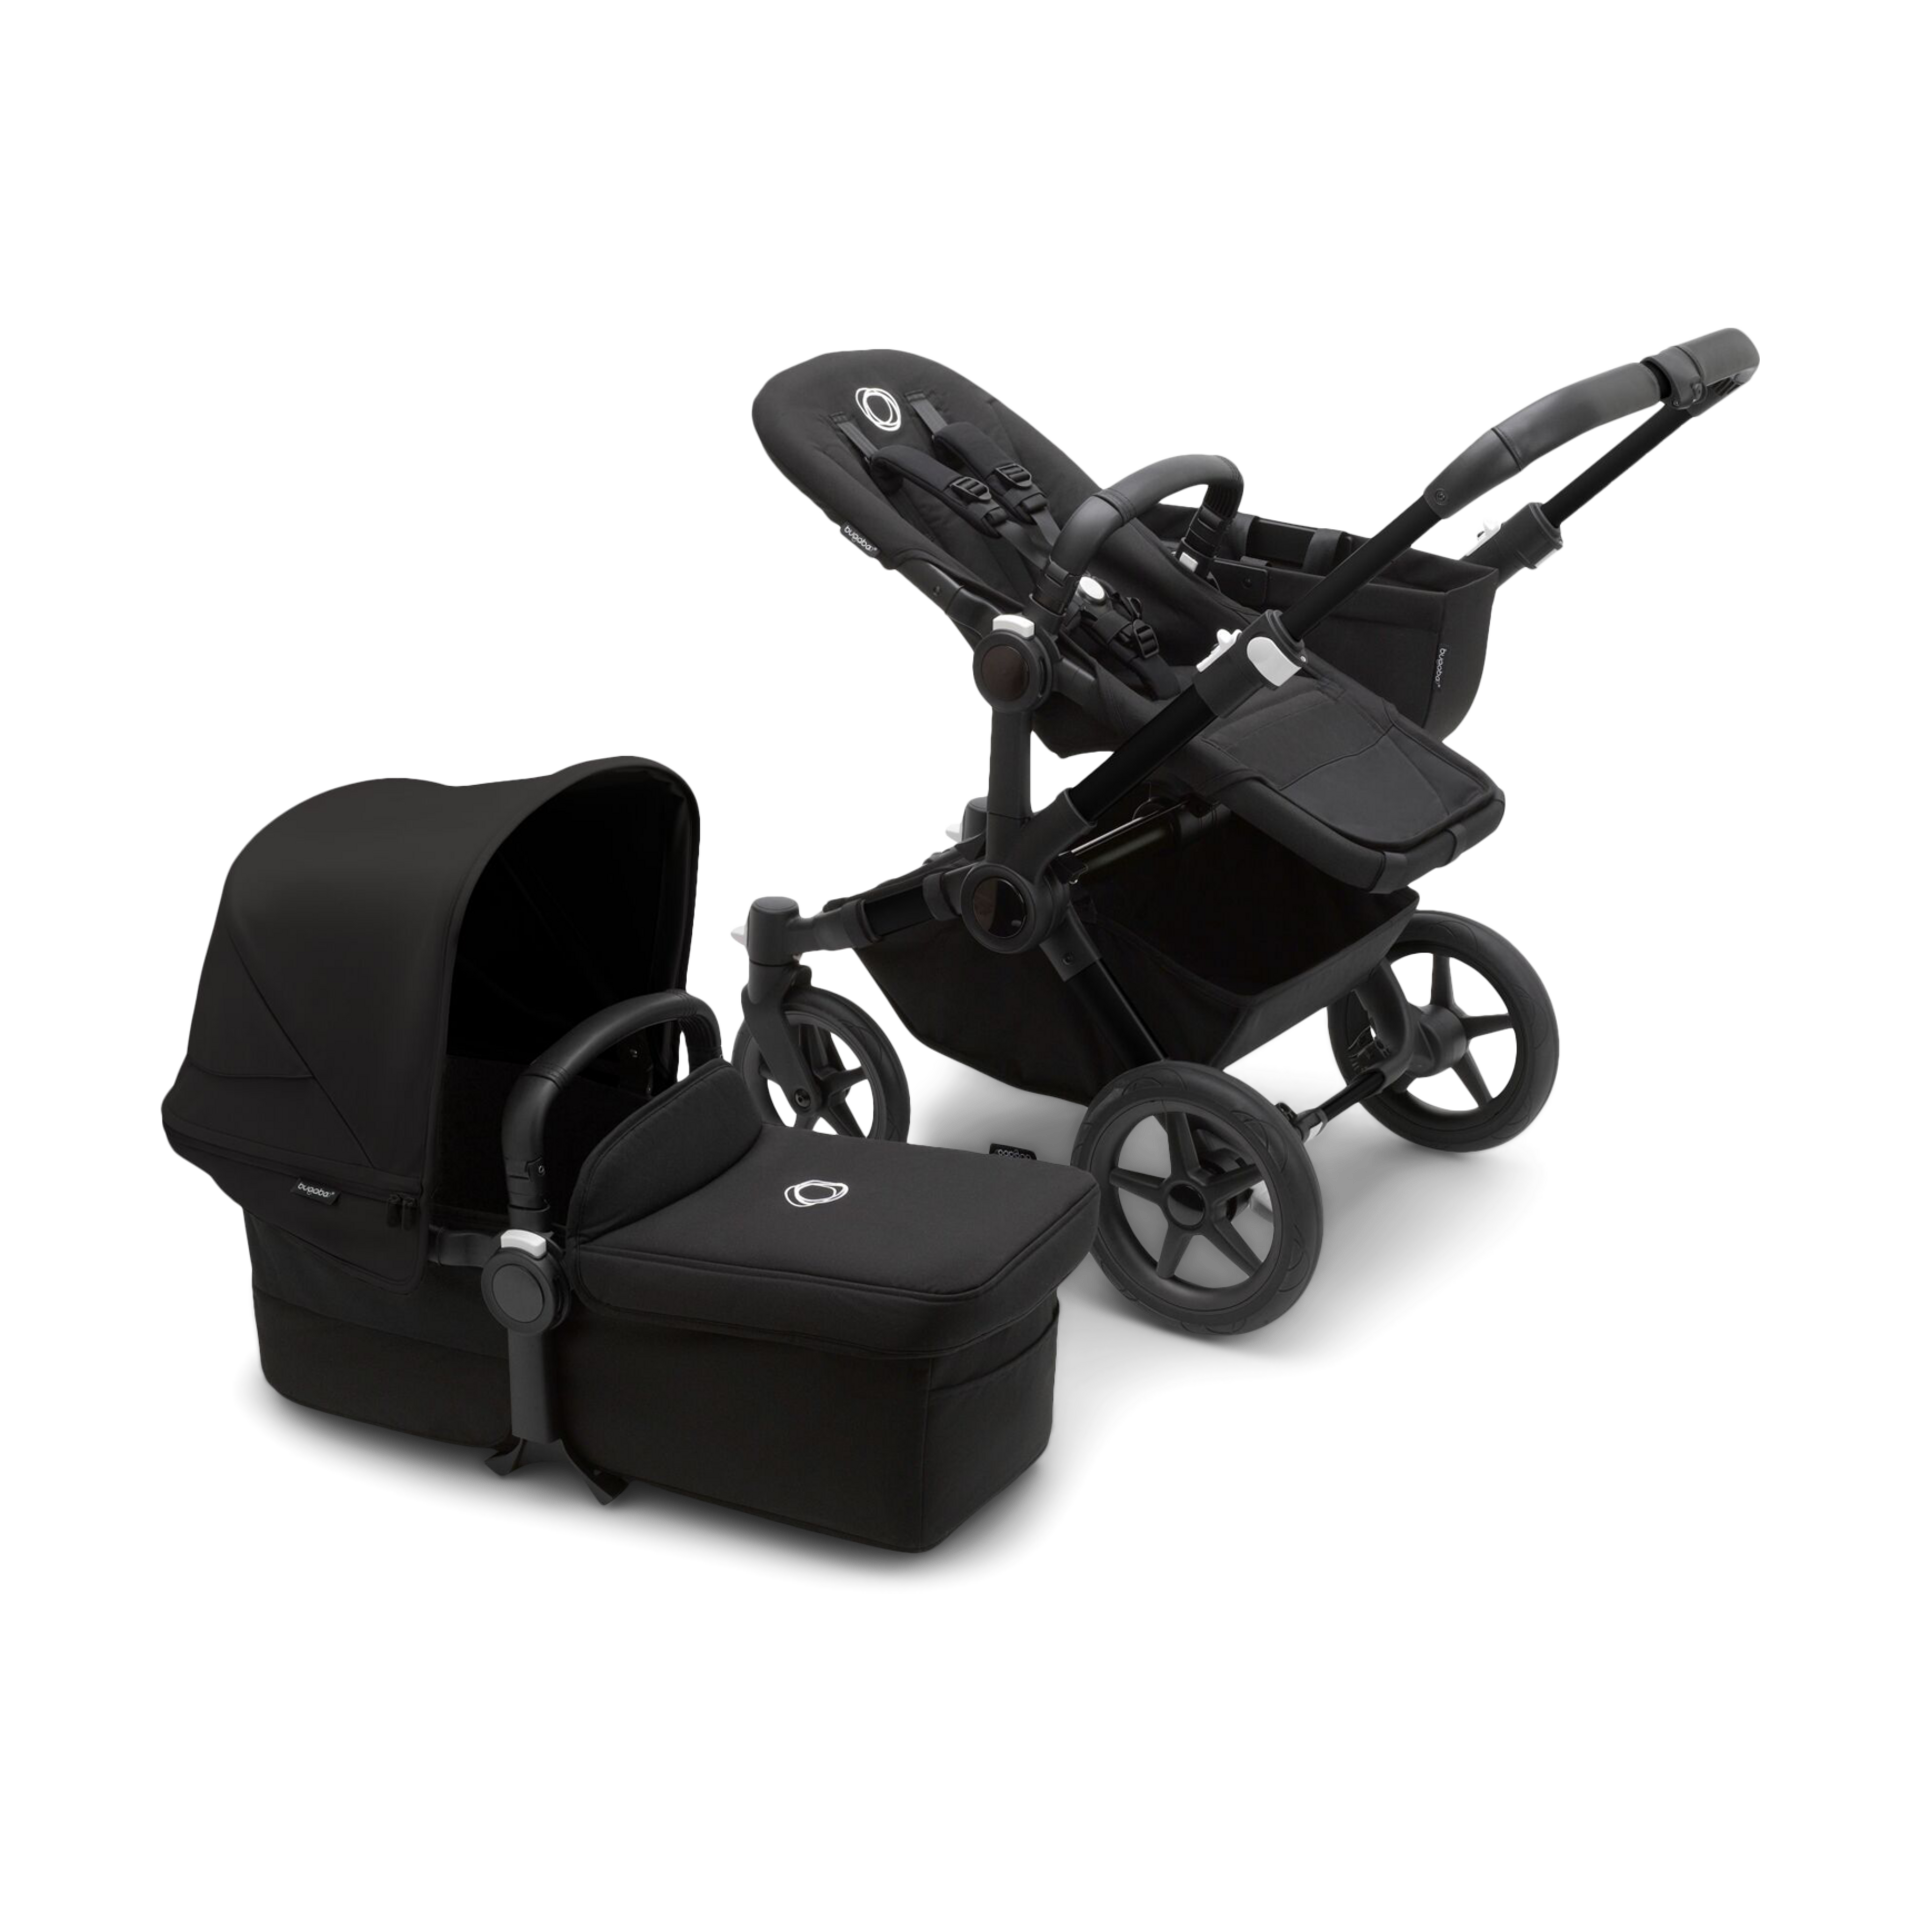 Black Faux Leather Handlebar Cover to fit Bugaboo Cameleon 1 2 3 Baby Strollers 